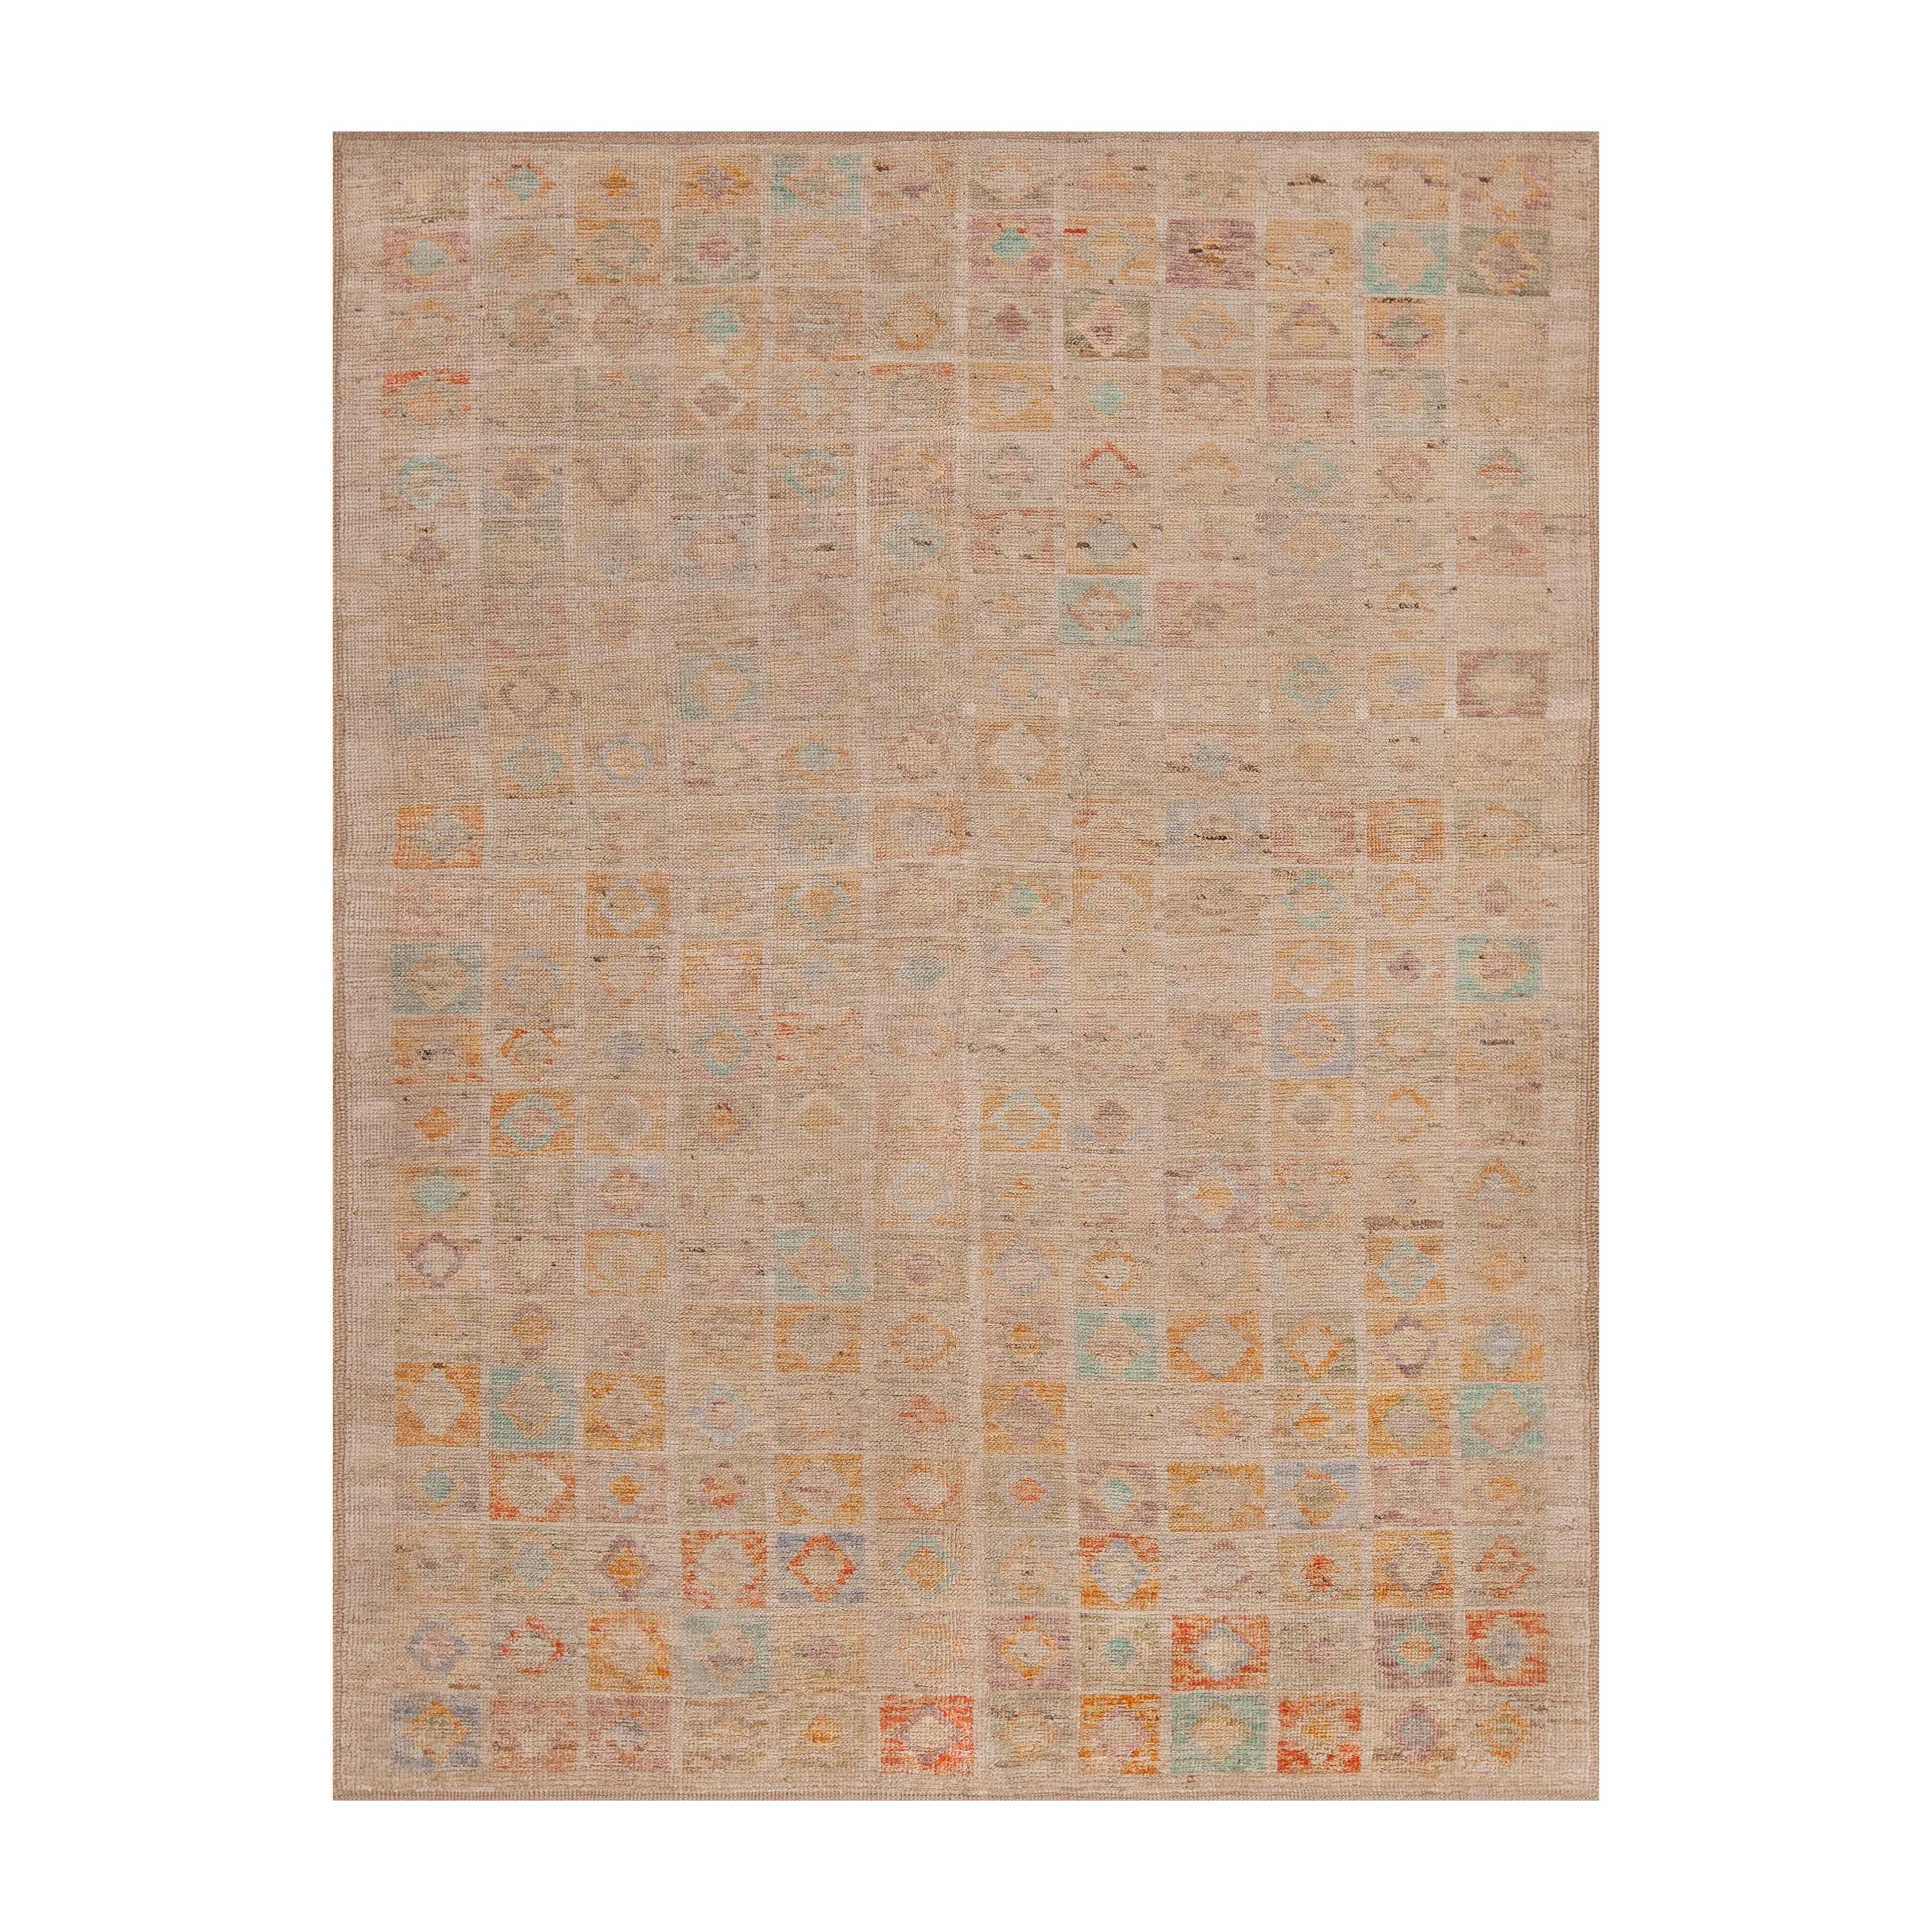 Nazmiyal Collection Large Modern Rustic Geometric Allover Area Rug 5'1" x 6'7"